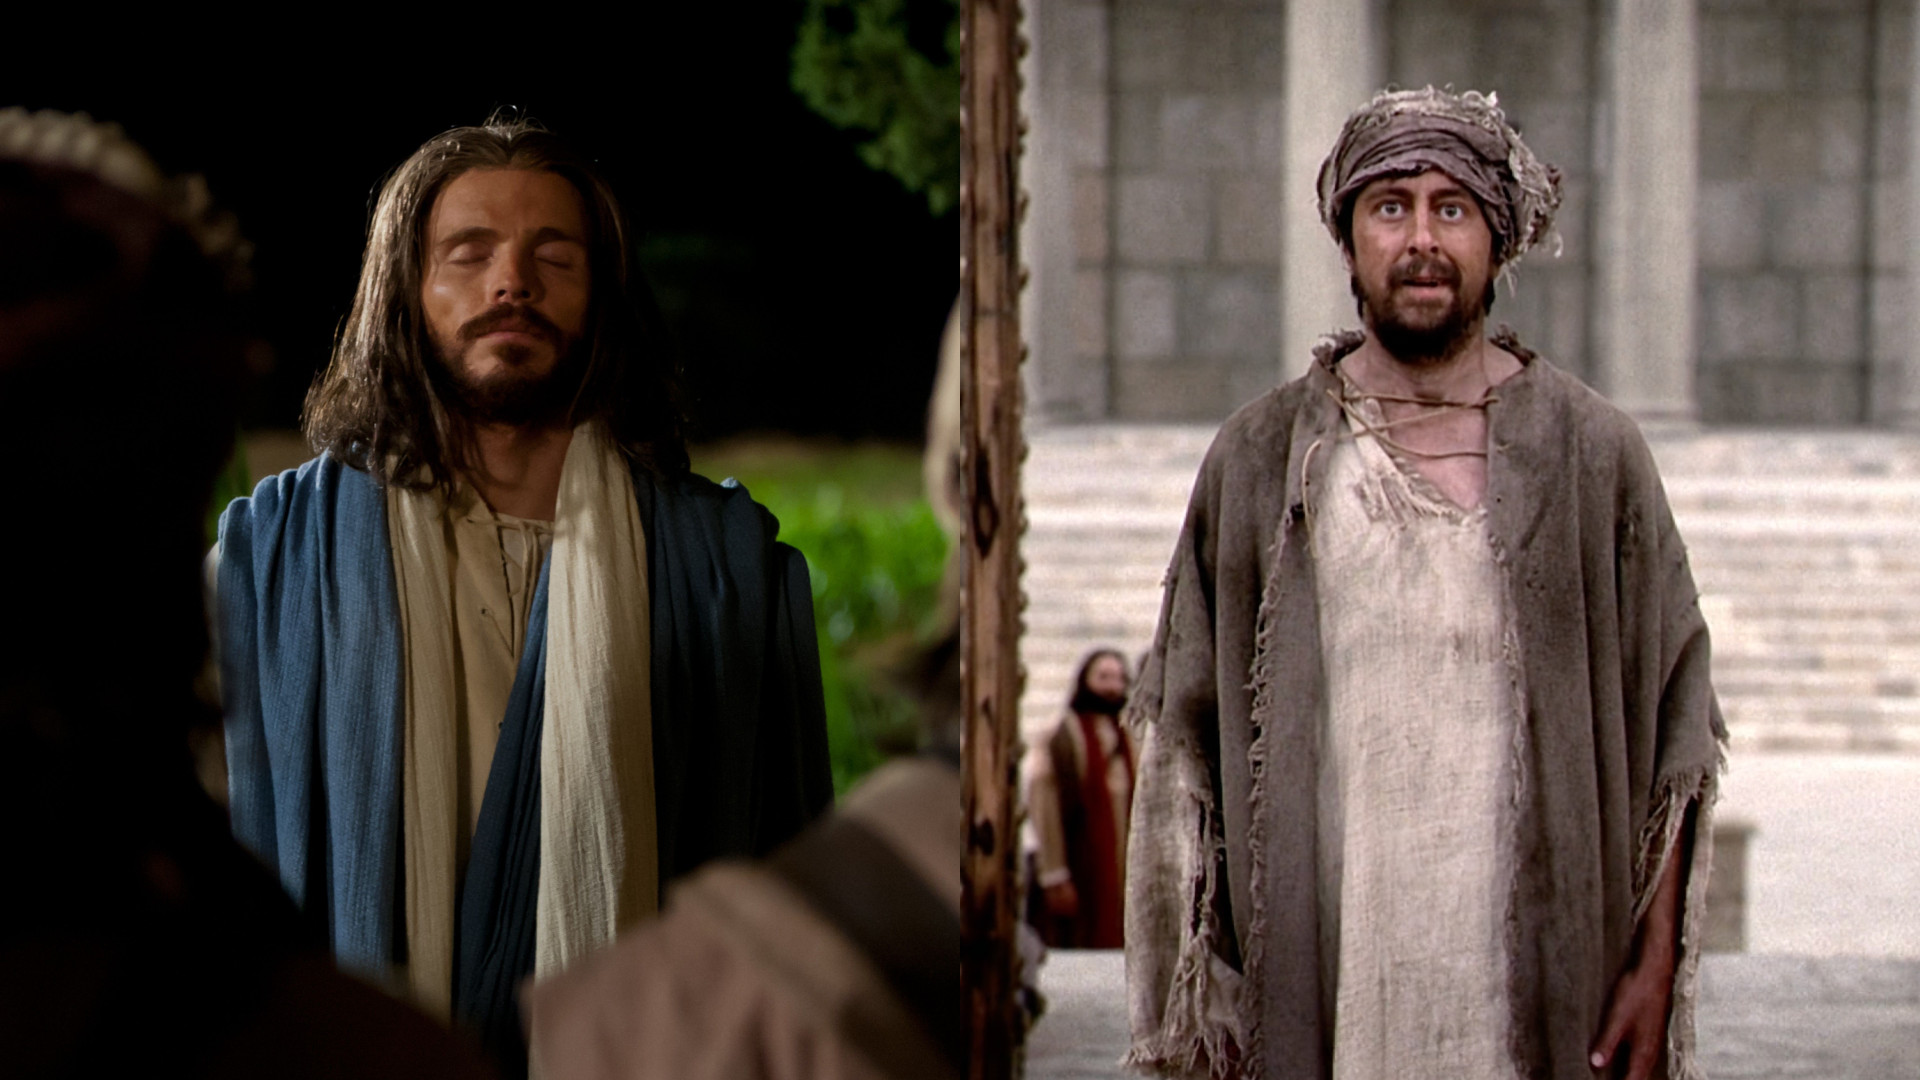 On the left, Jesus offers his intercessory prayer for his disciples, on the right, a formerly crippled man healed by Peter enters the temple for the first time. Images courtesy The Church of Jesus Christ of Latter-day Saints.